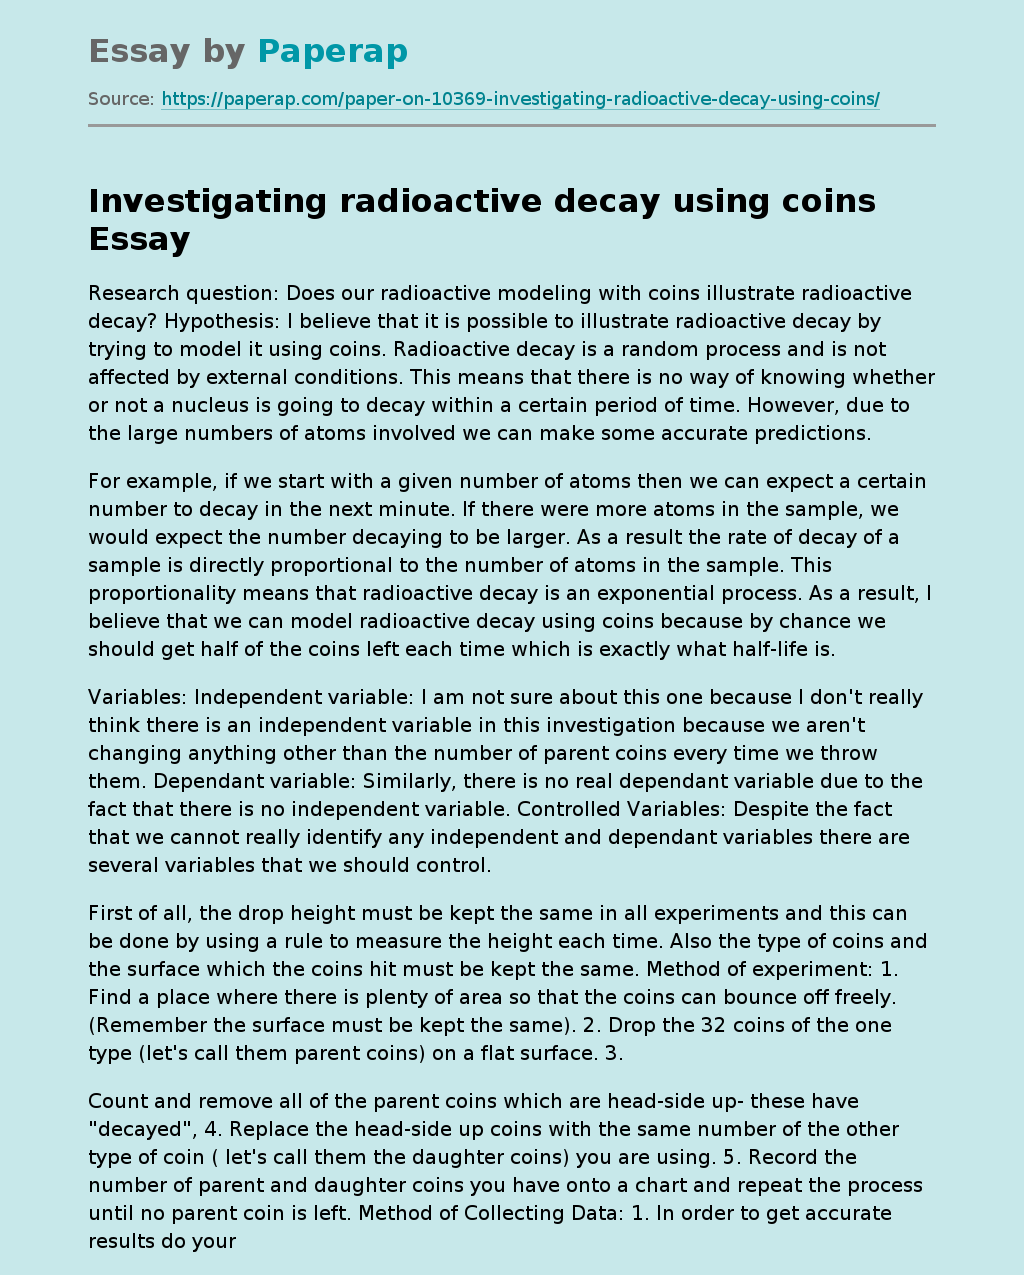 Does Our Radioactive Modeling With Coins Illustrate Radioactive Decay?